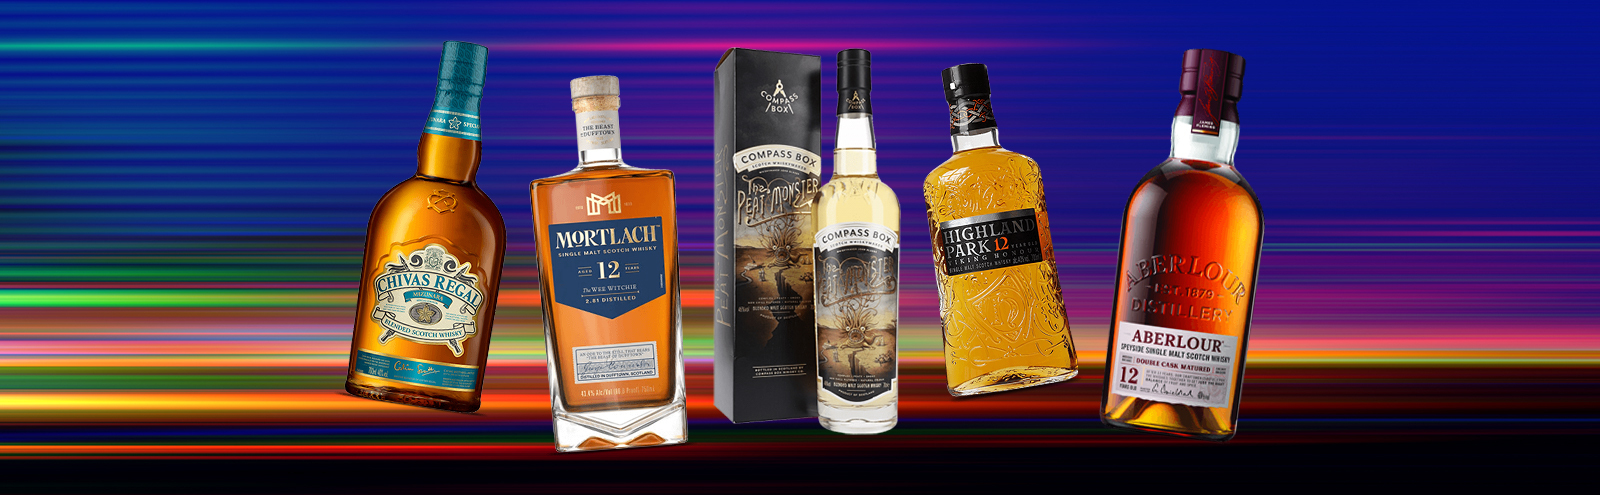 The 10 Best Bottles Of Scotch Whisky for Under $60